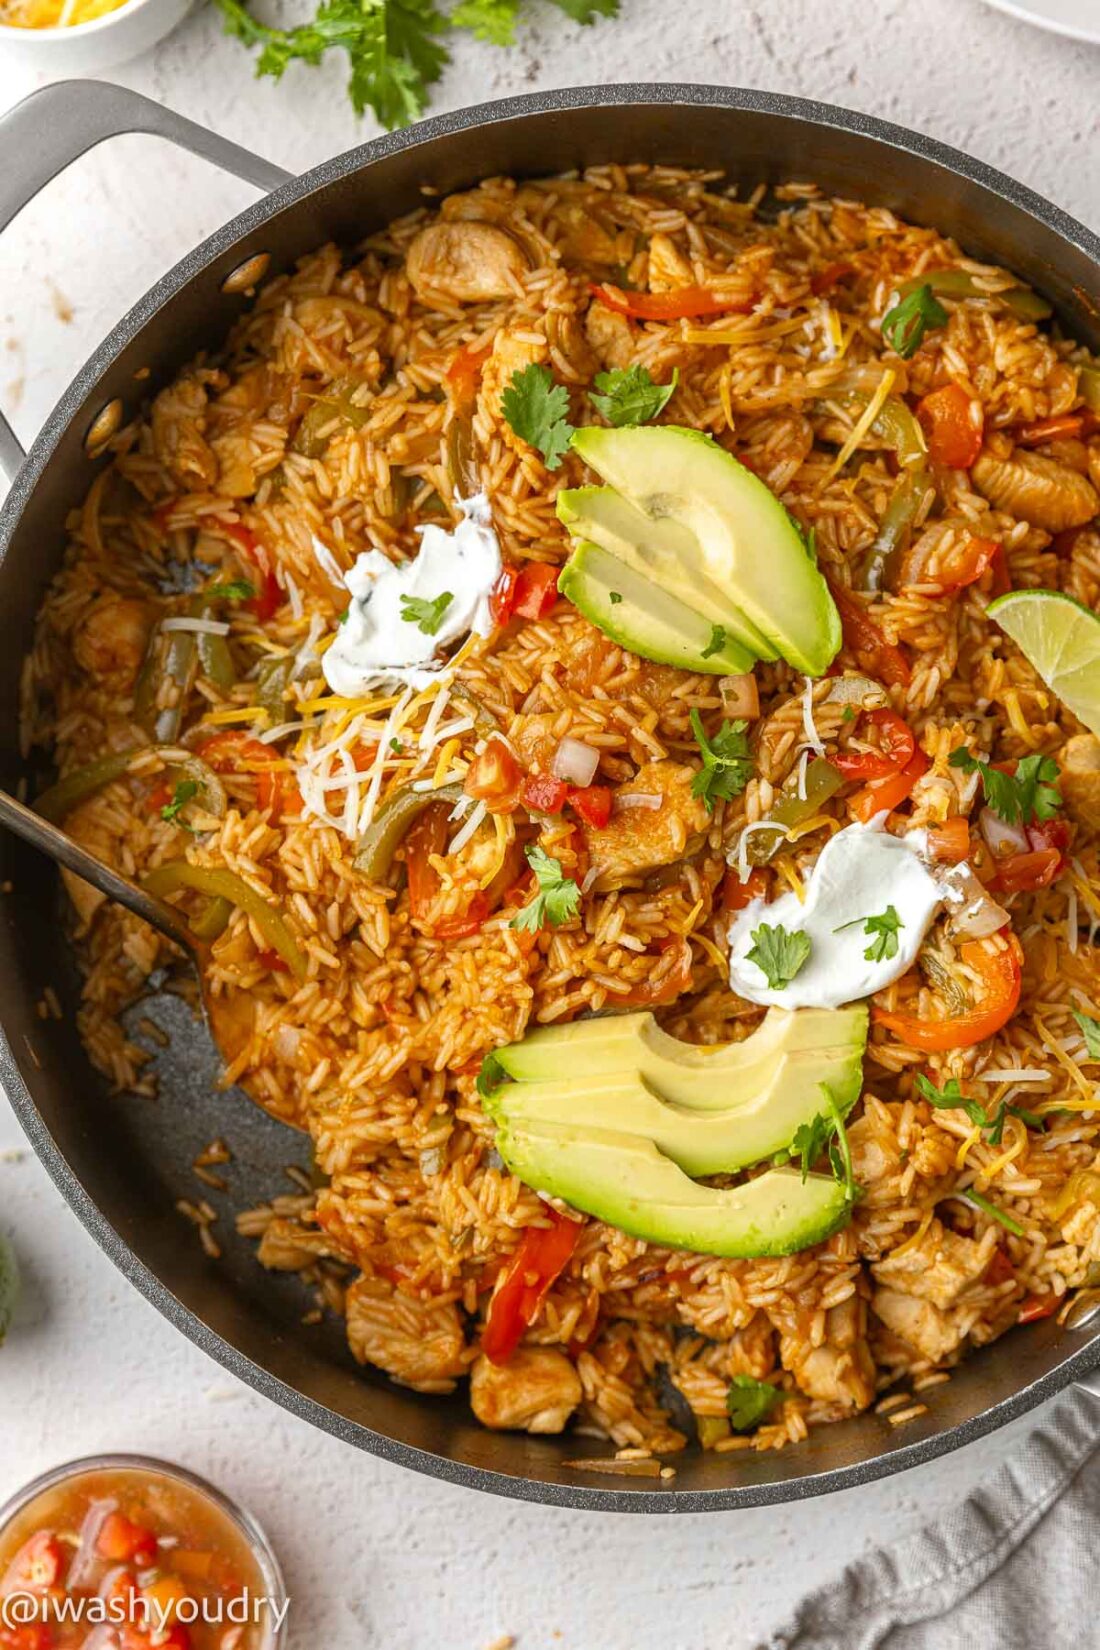 large black skillet filled with fajita rice, chicken and peppers. Topped with cheese and avocado slices.